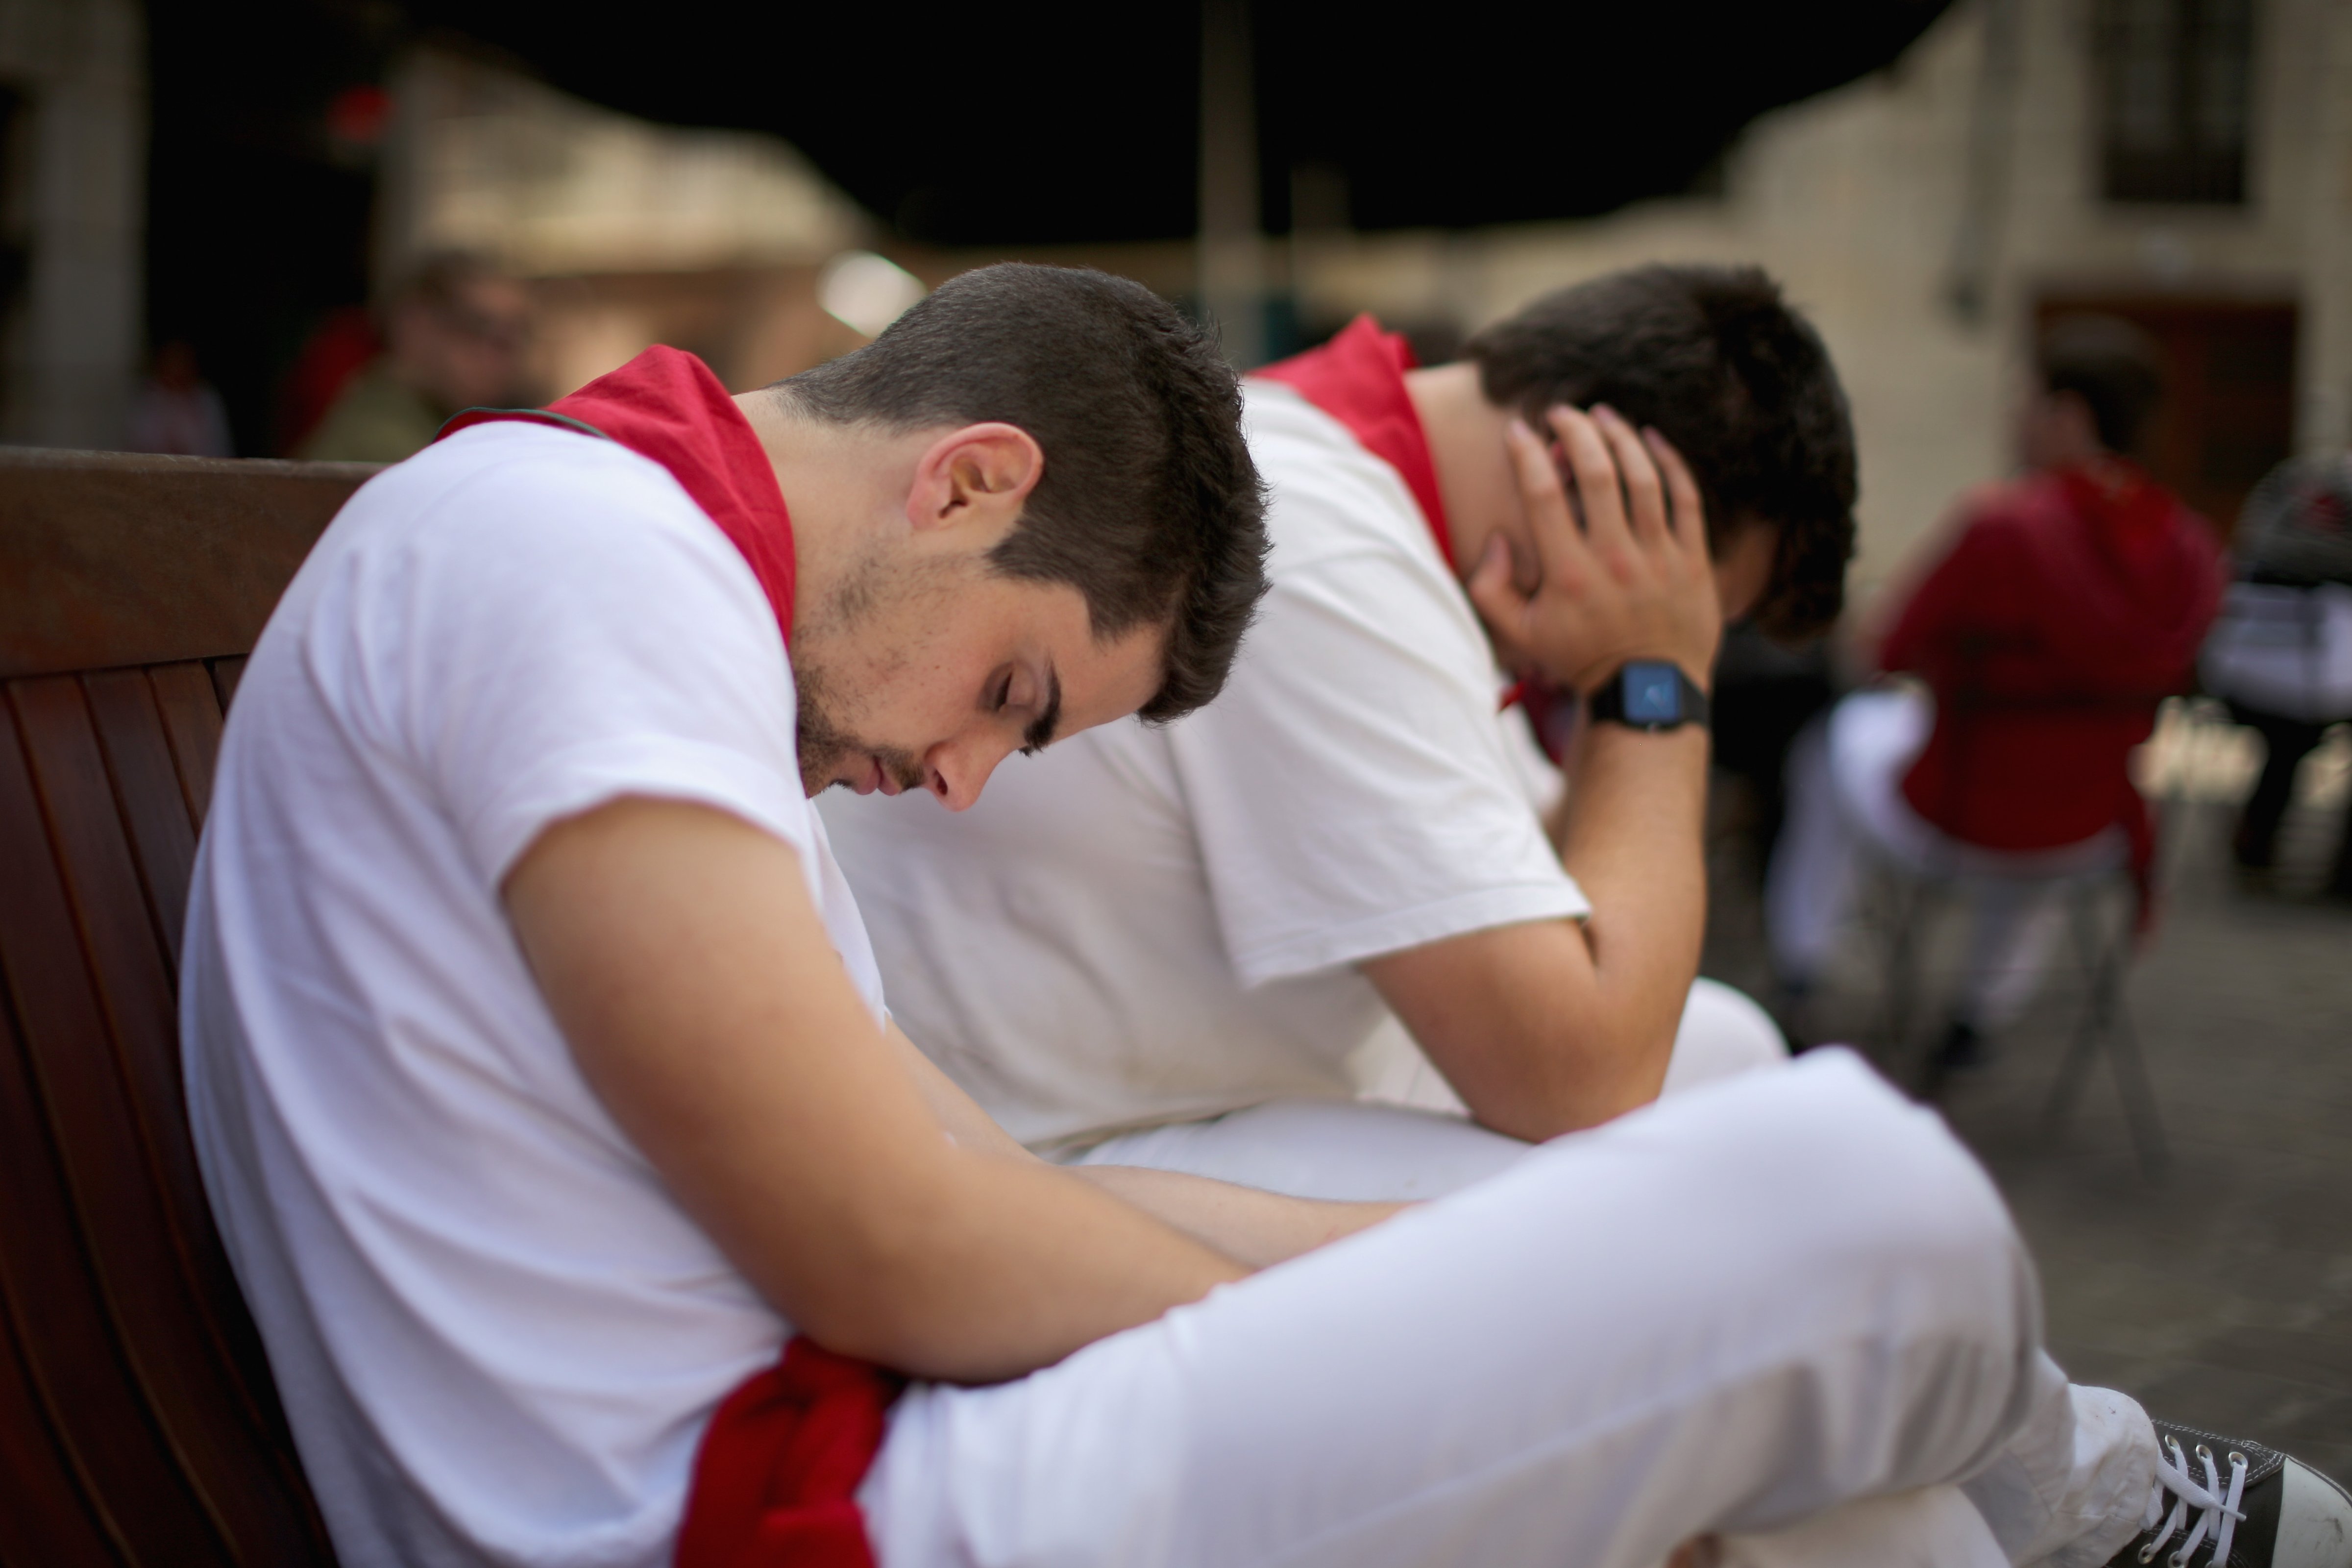 Revellers take an afternoon siesta sleeping off the effects of partying during the fourth day of the San Fermin Running Of The Bulls festival, on July 9, 2014 in Pamplona, Spain. (Christopher Furlon/Getty Images)